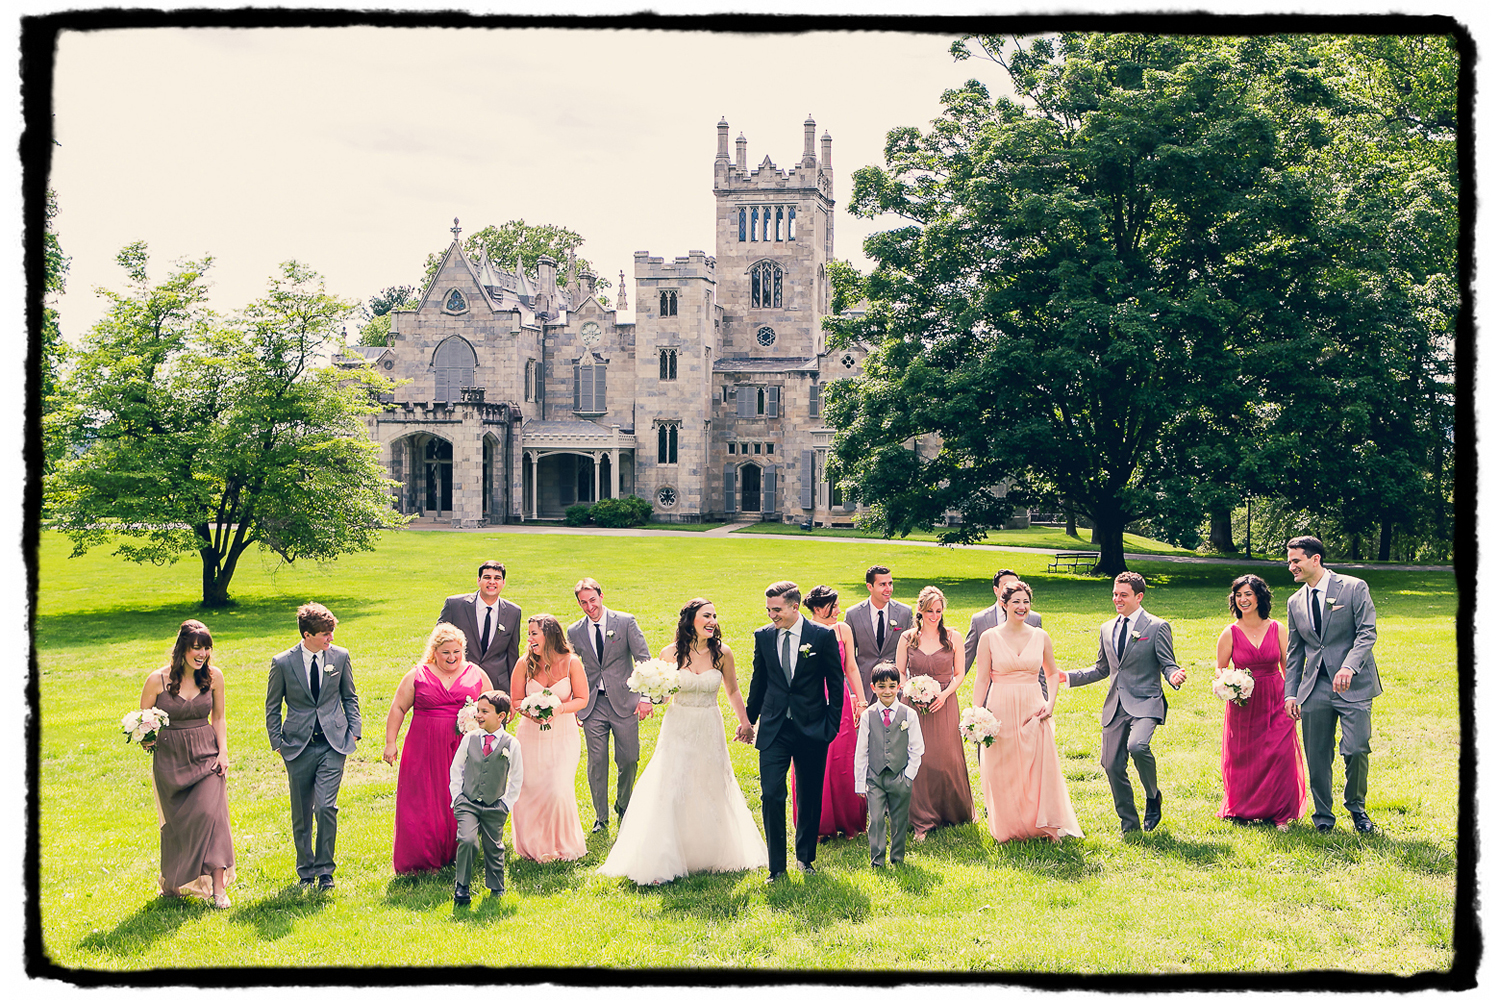 A wedding party in shades of pink and grey outside at Lyndhurst Castle in Westchester NY.